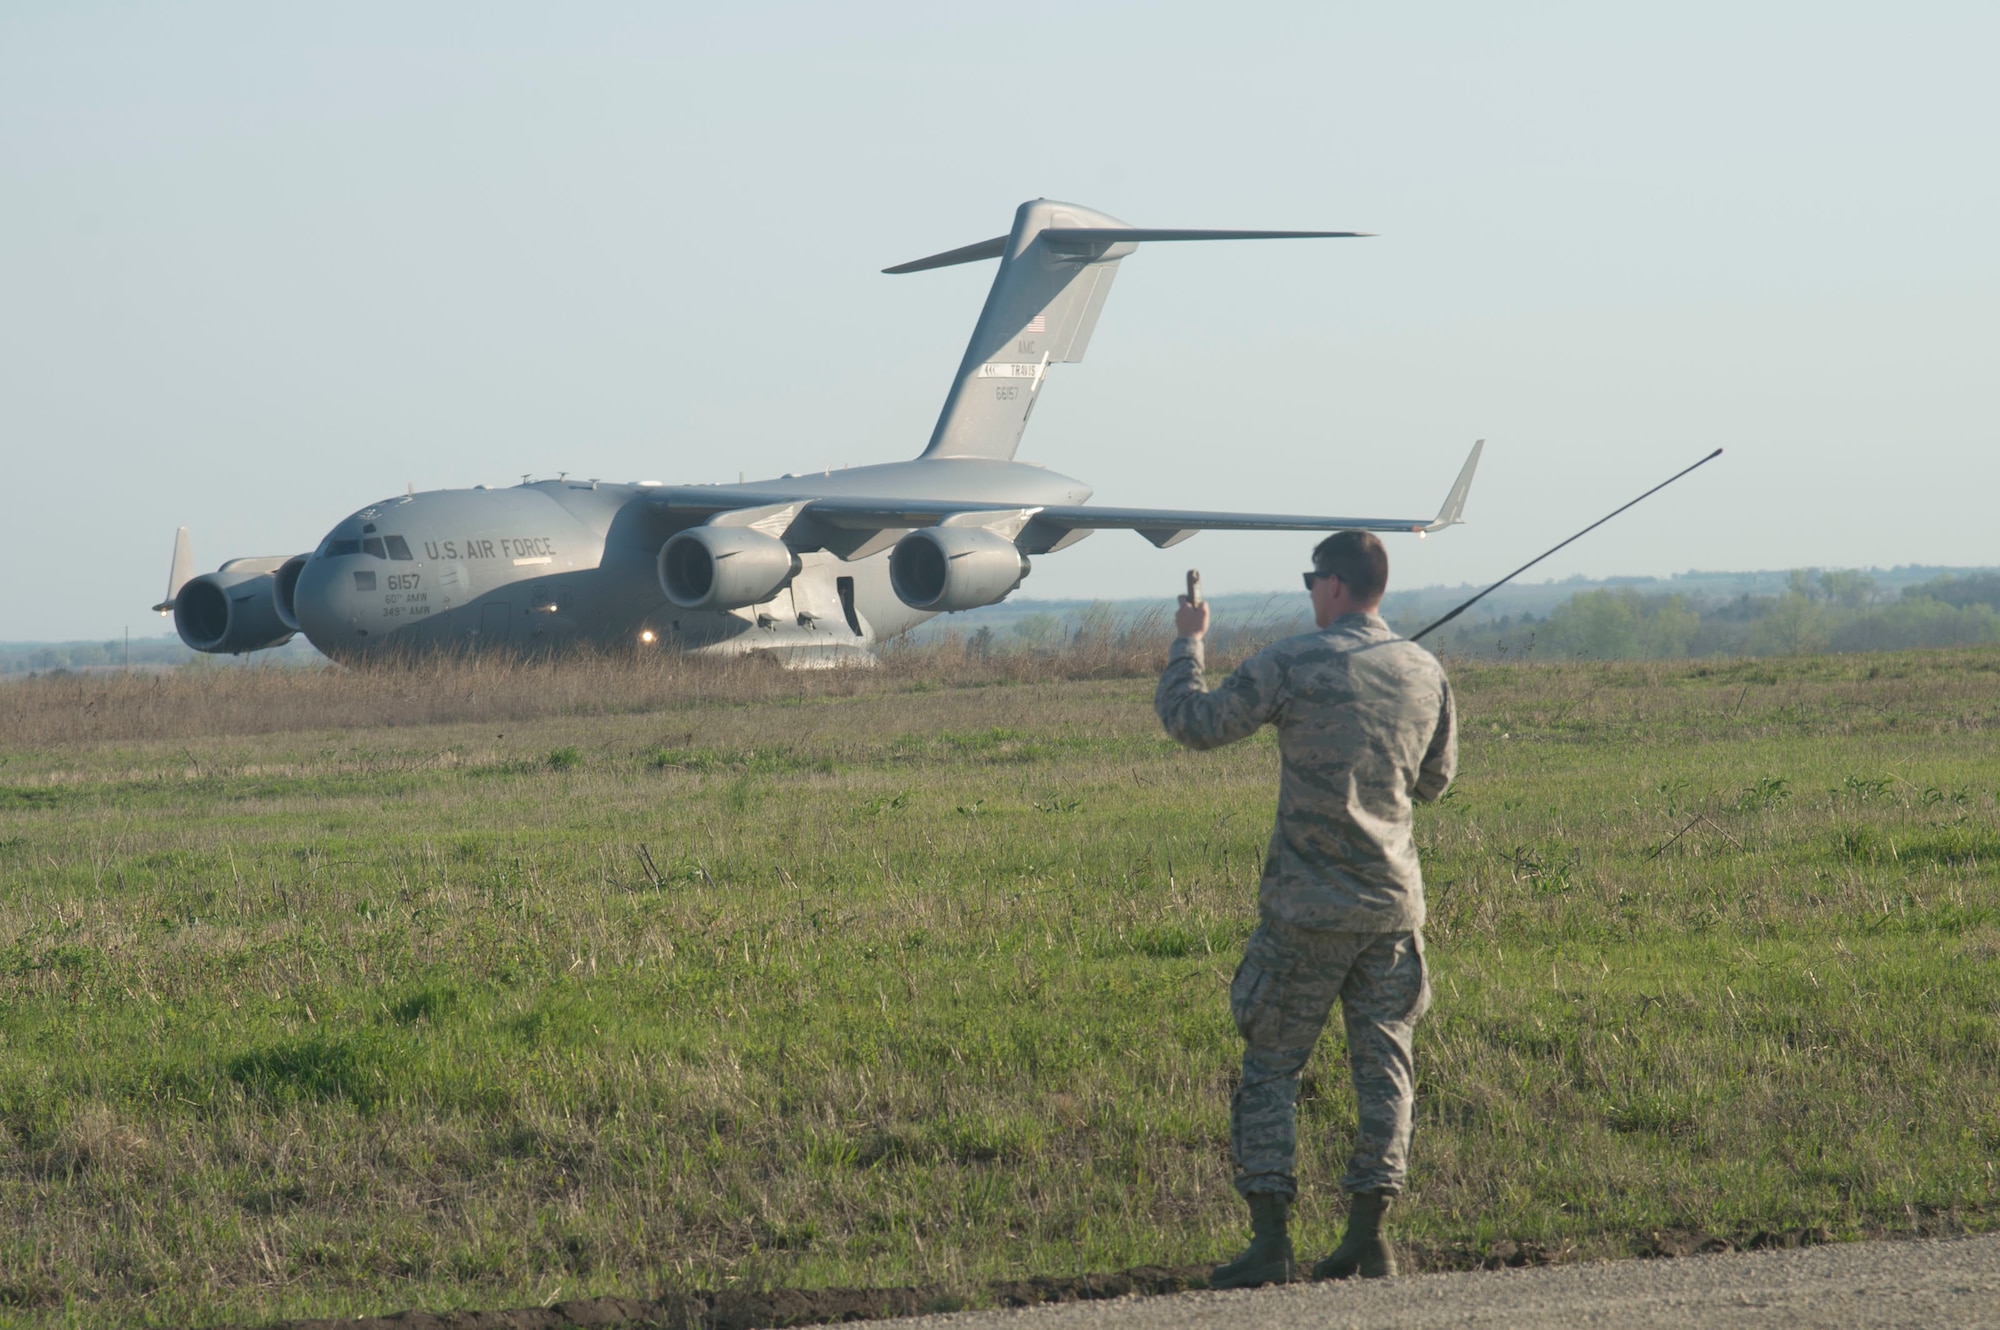 Senior Airman Erwin Fein, an air traffic controller with the 621 Contingency Response Group at Joint Base McGuire-Dix-Lakehurst, checks weather data for a landing U.S. Air Force C-17 Globemaster, during joint exercise Cerberus Strike 17-01 at Savage Army Air Field, Kansas on April 17, 2017. The joint exercise allows members the opportunity to rehearse potential real-world situations, including in cargo uploading and downloading on aircraft. (U.S. Air Force photo by Staff Sgt. Robert Waggoner/RELEASED)